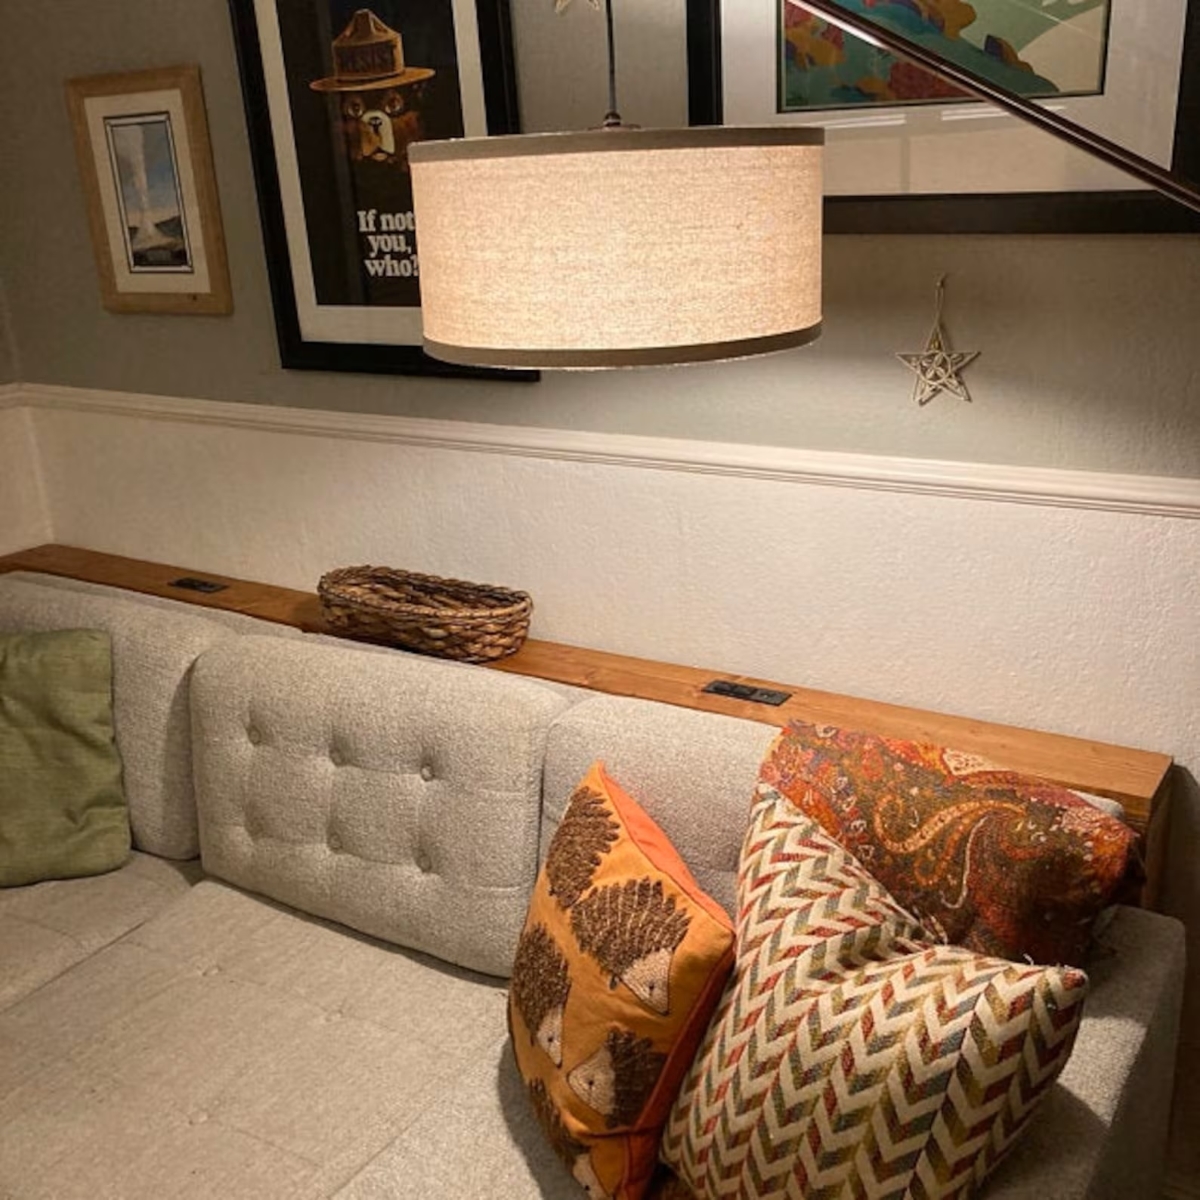 Slim wood sofa table behind a beige couch, with a round pendant light hanging overhead and artwork on the walls behind the sofa.